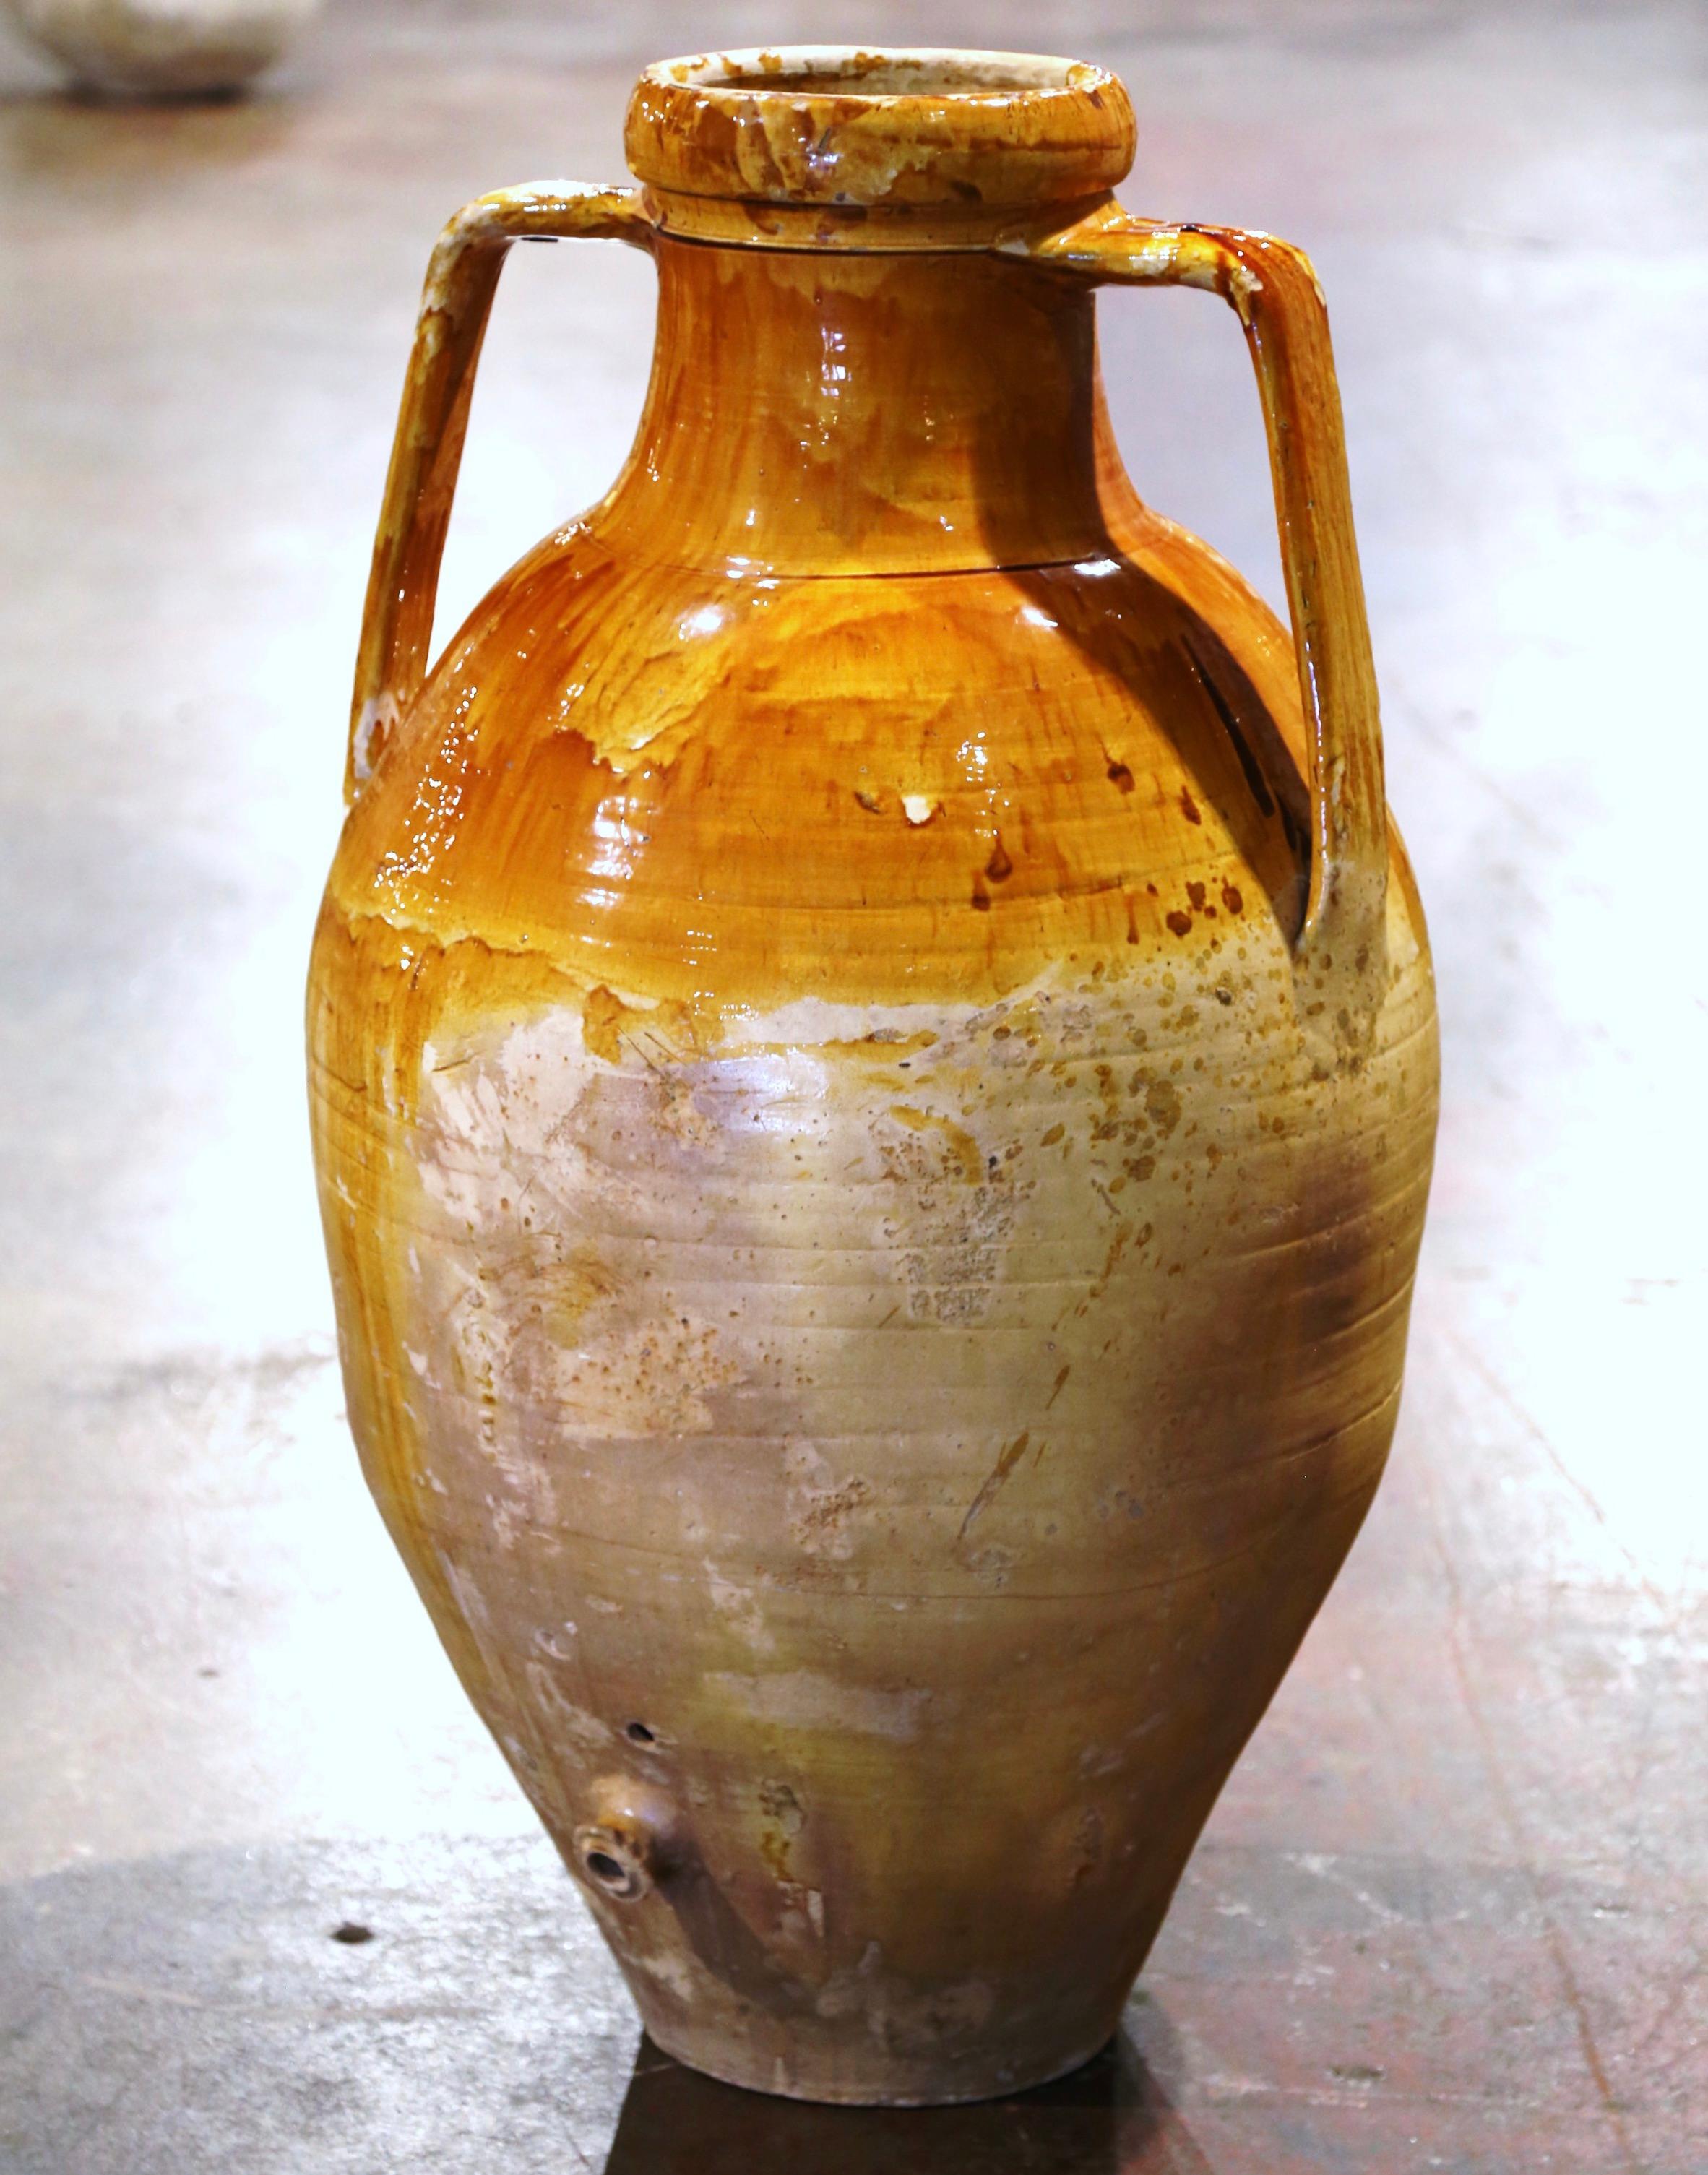 Add a Mediterranean touch to your indoor or outdoor spaces with this elegant antique terracotta Amphora. Crafted in southern Italy circa 1860, the large urn has a traditional round shape over a long neck; it is dressed with double handles, and